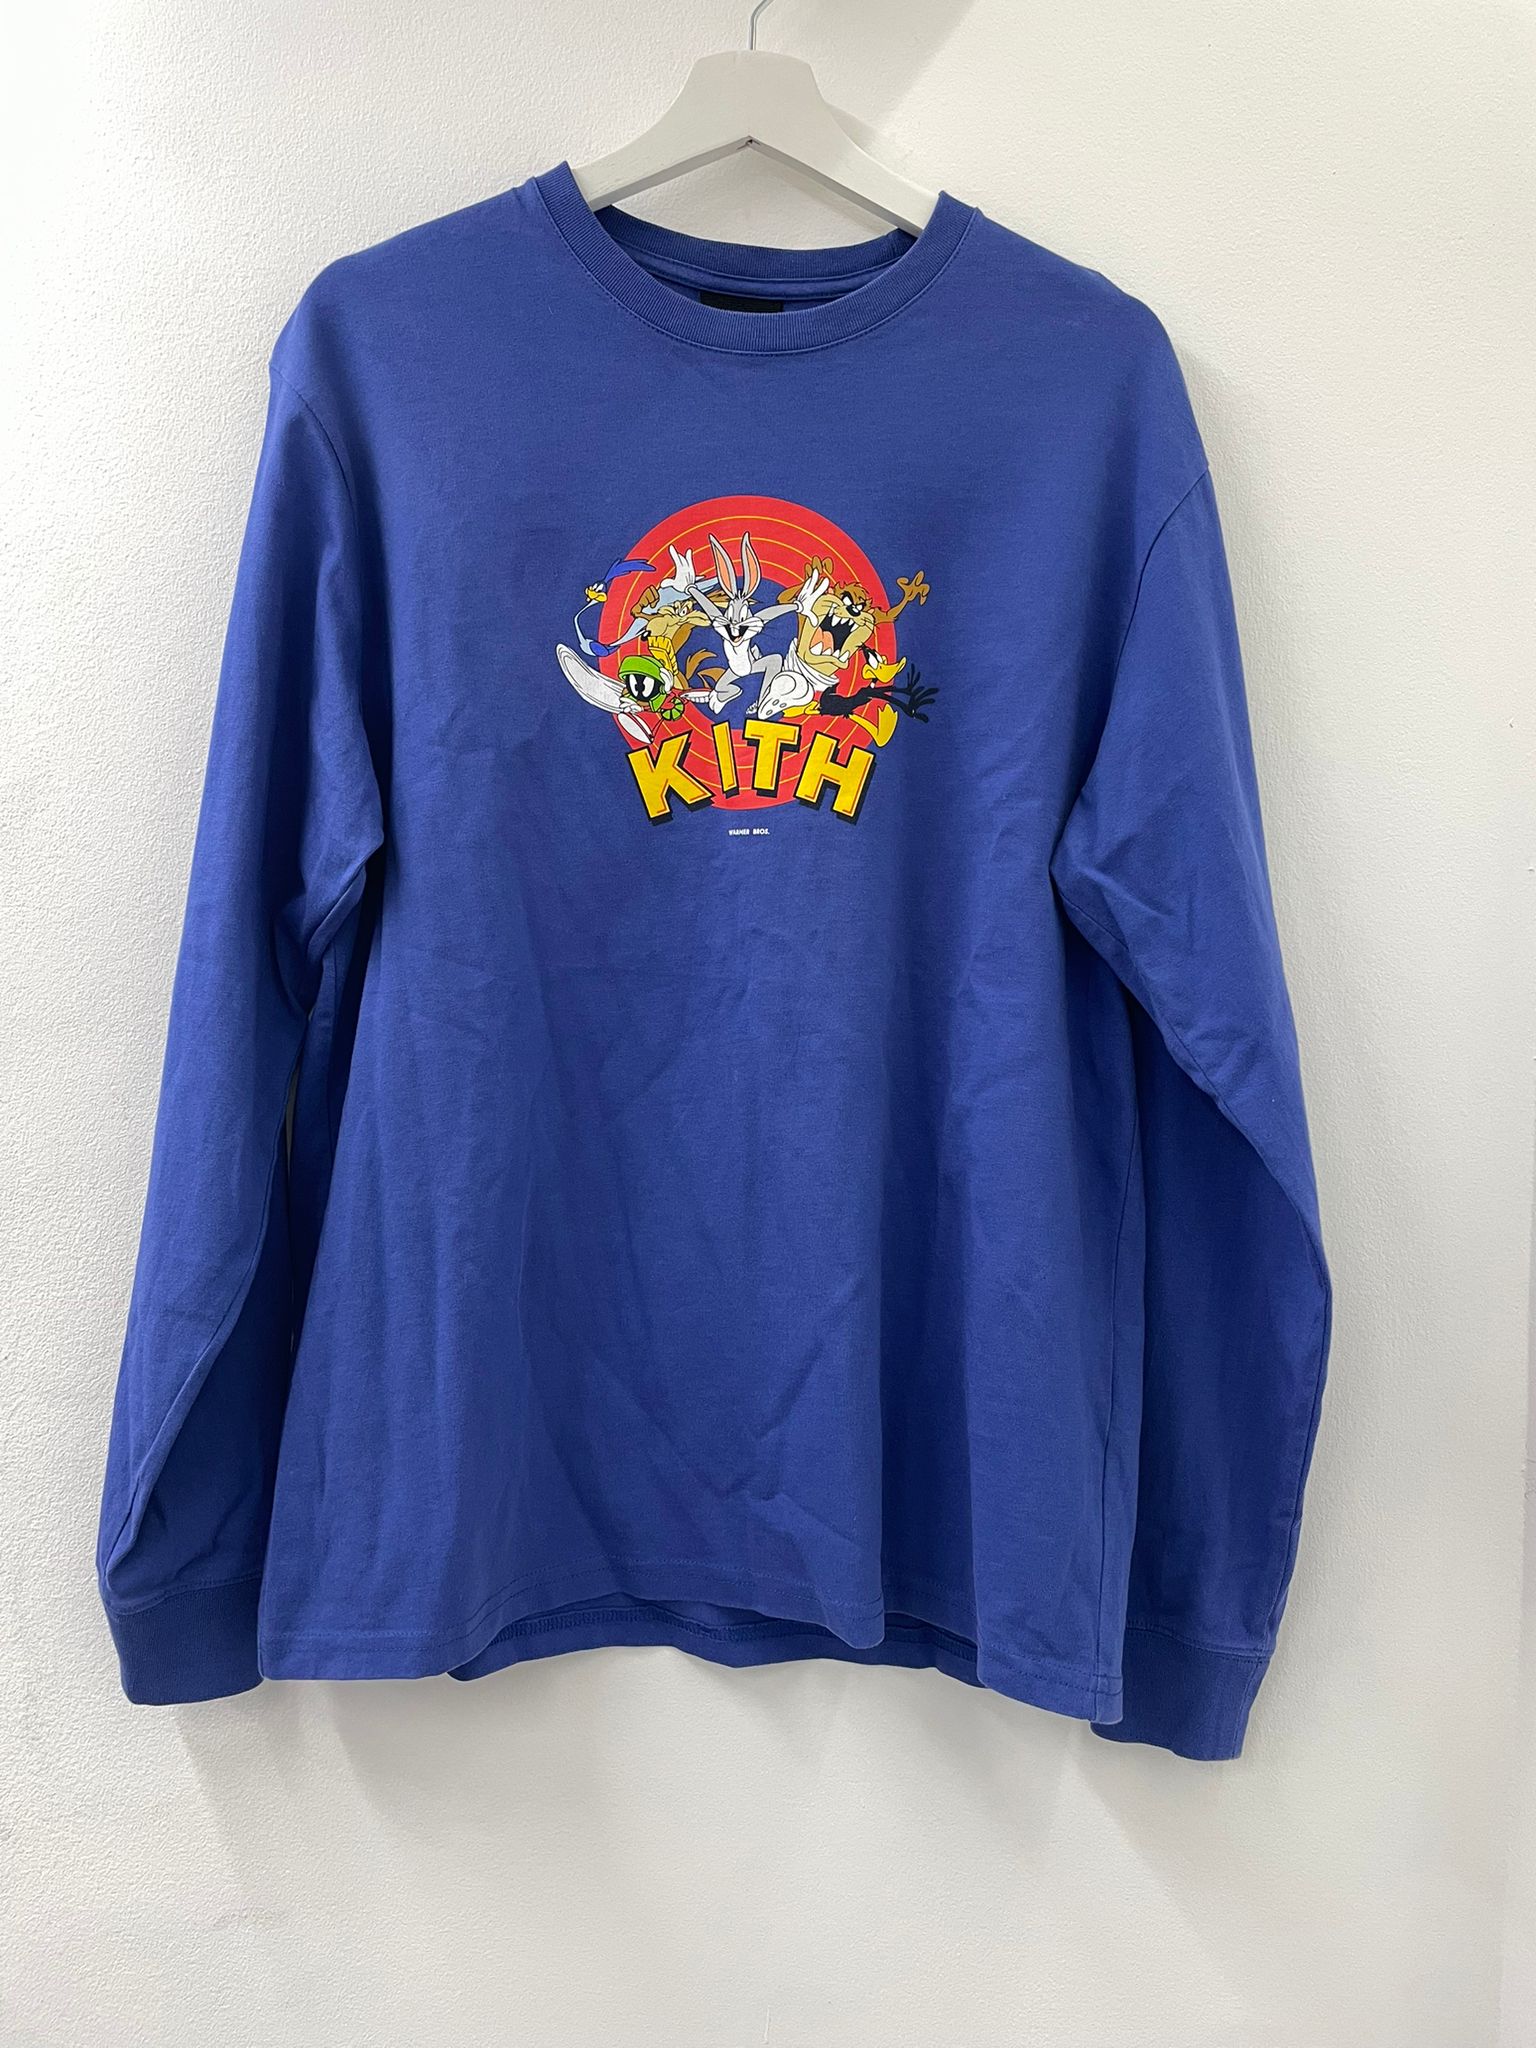 PRE LOVED - KITH LOONEY TUNES LONG SLEEVE SHIRT